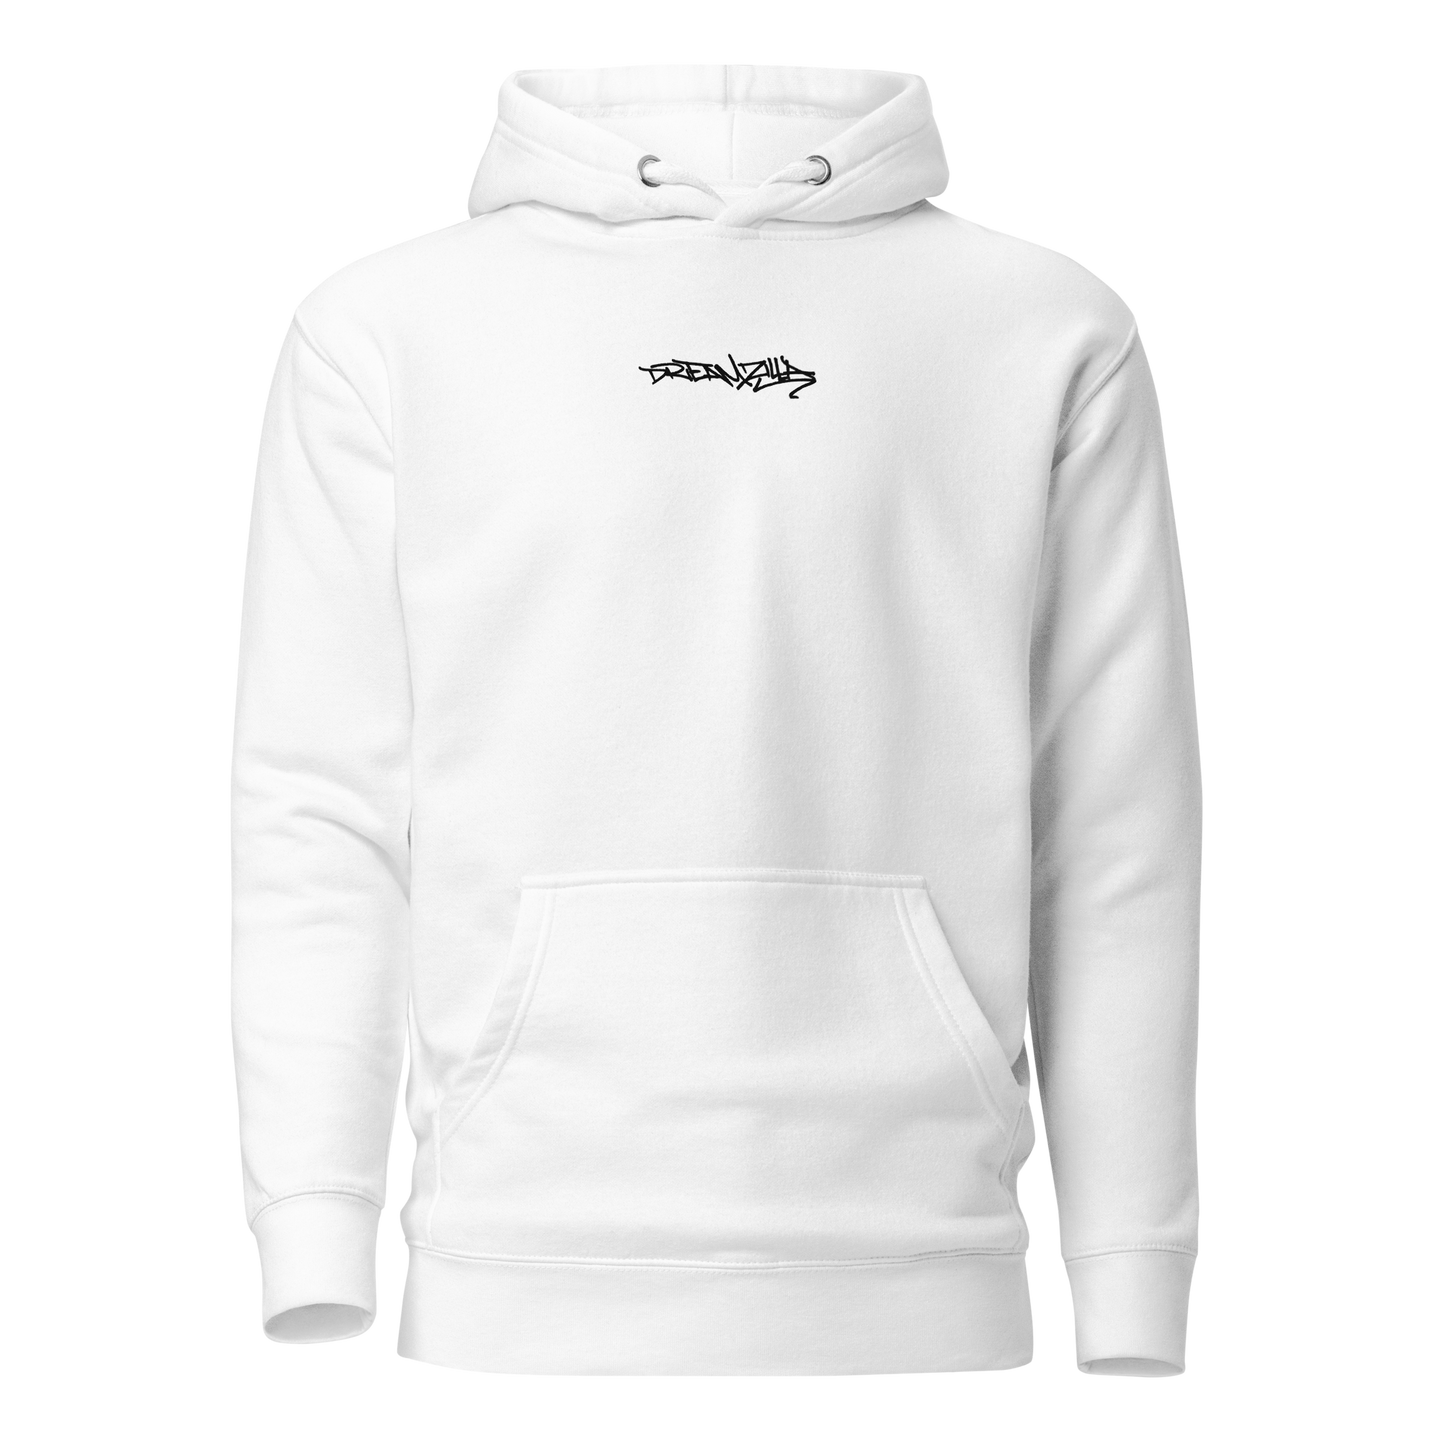 Graffiti Tag+Wildstyle by Sanitor Unisex Hoodie in White